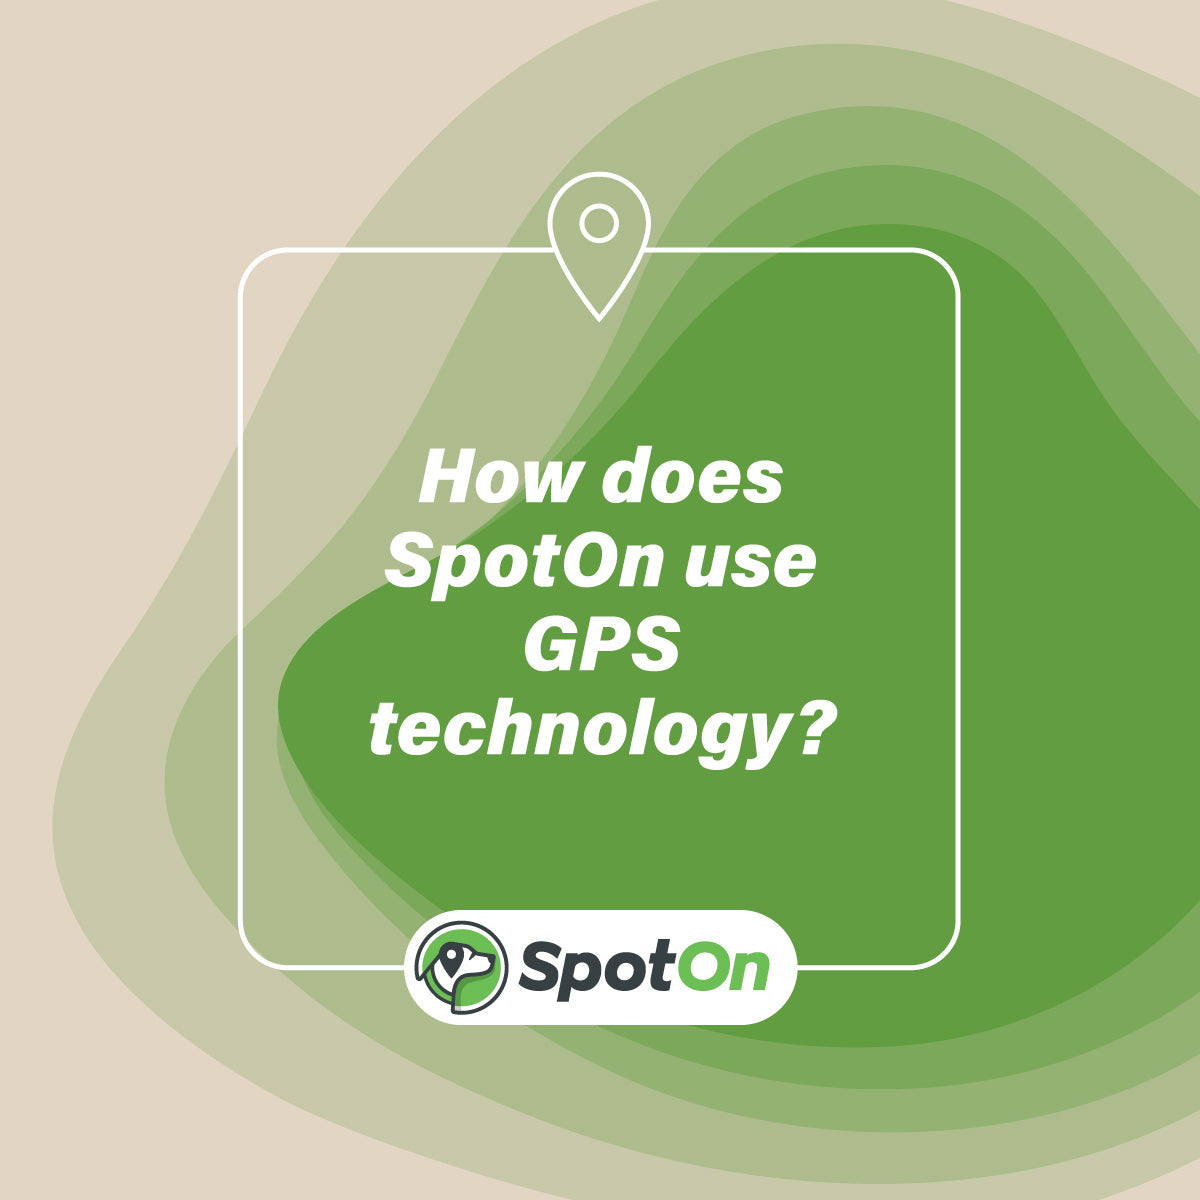 How does SpotOn use GPS technology?